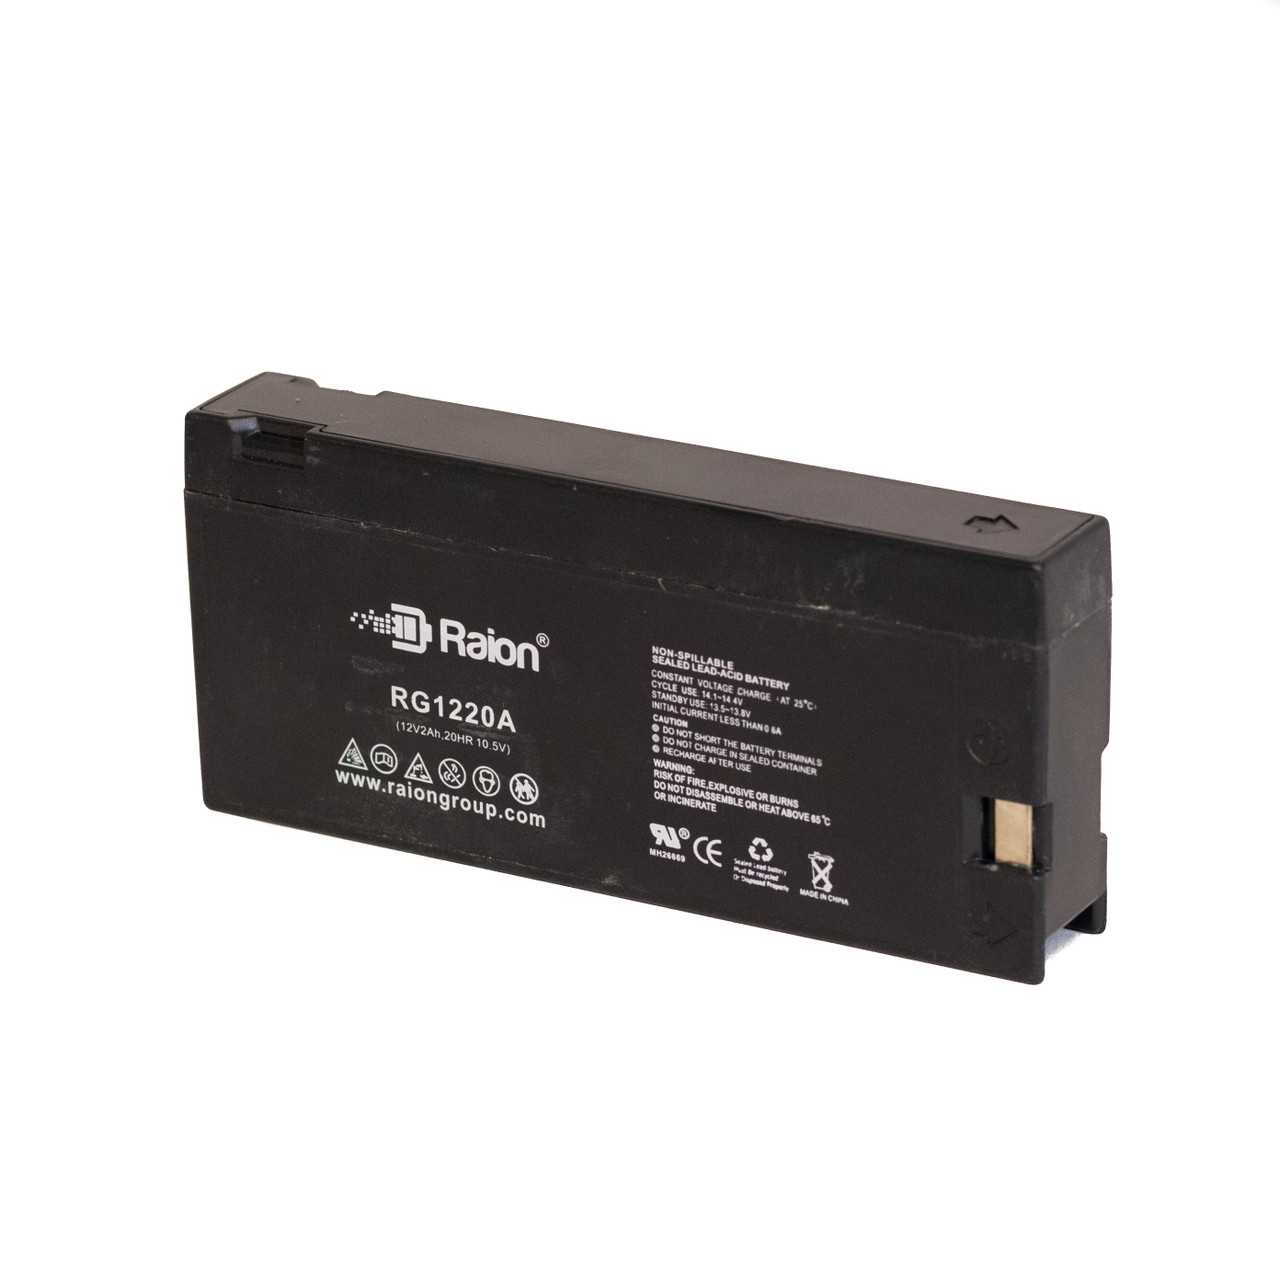 Raion Power RG1220A Replacement Battery for Magnavox VR-8382